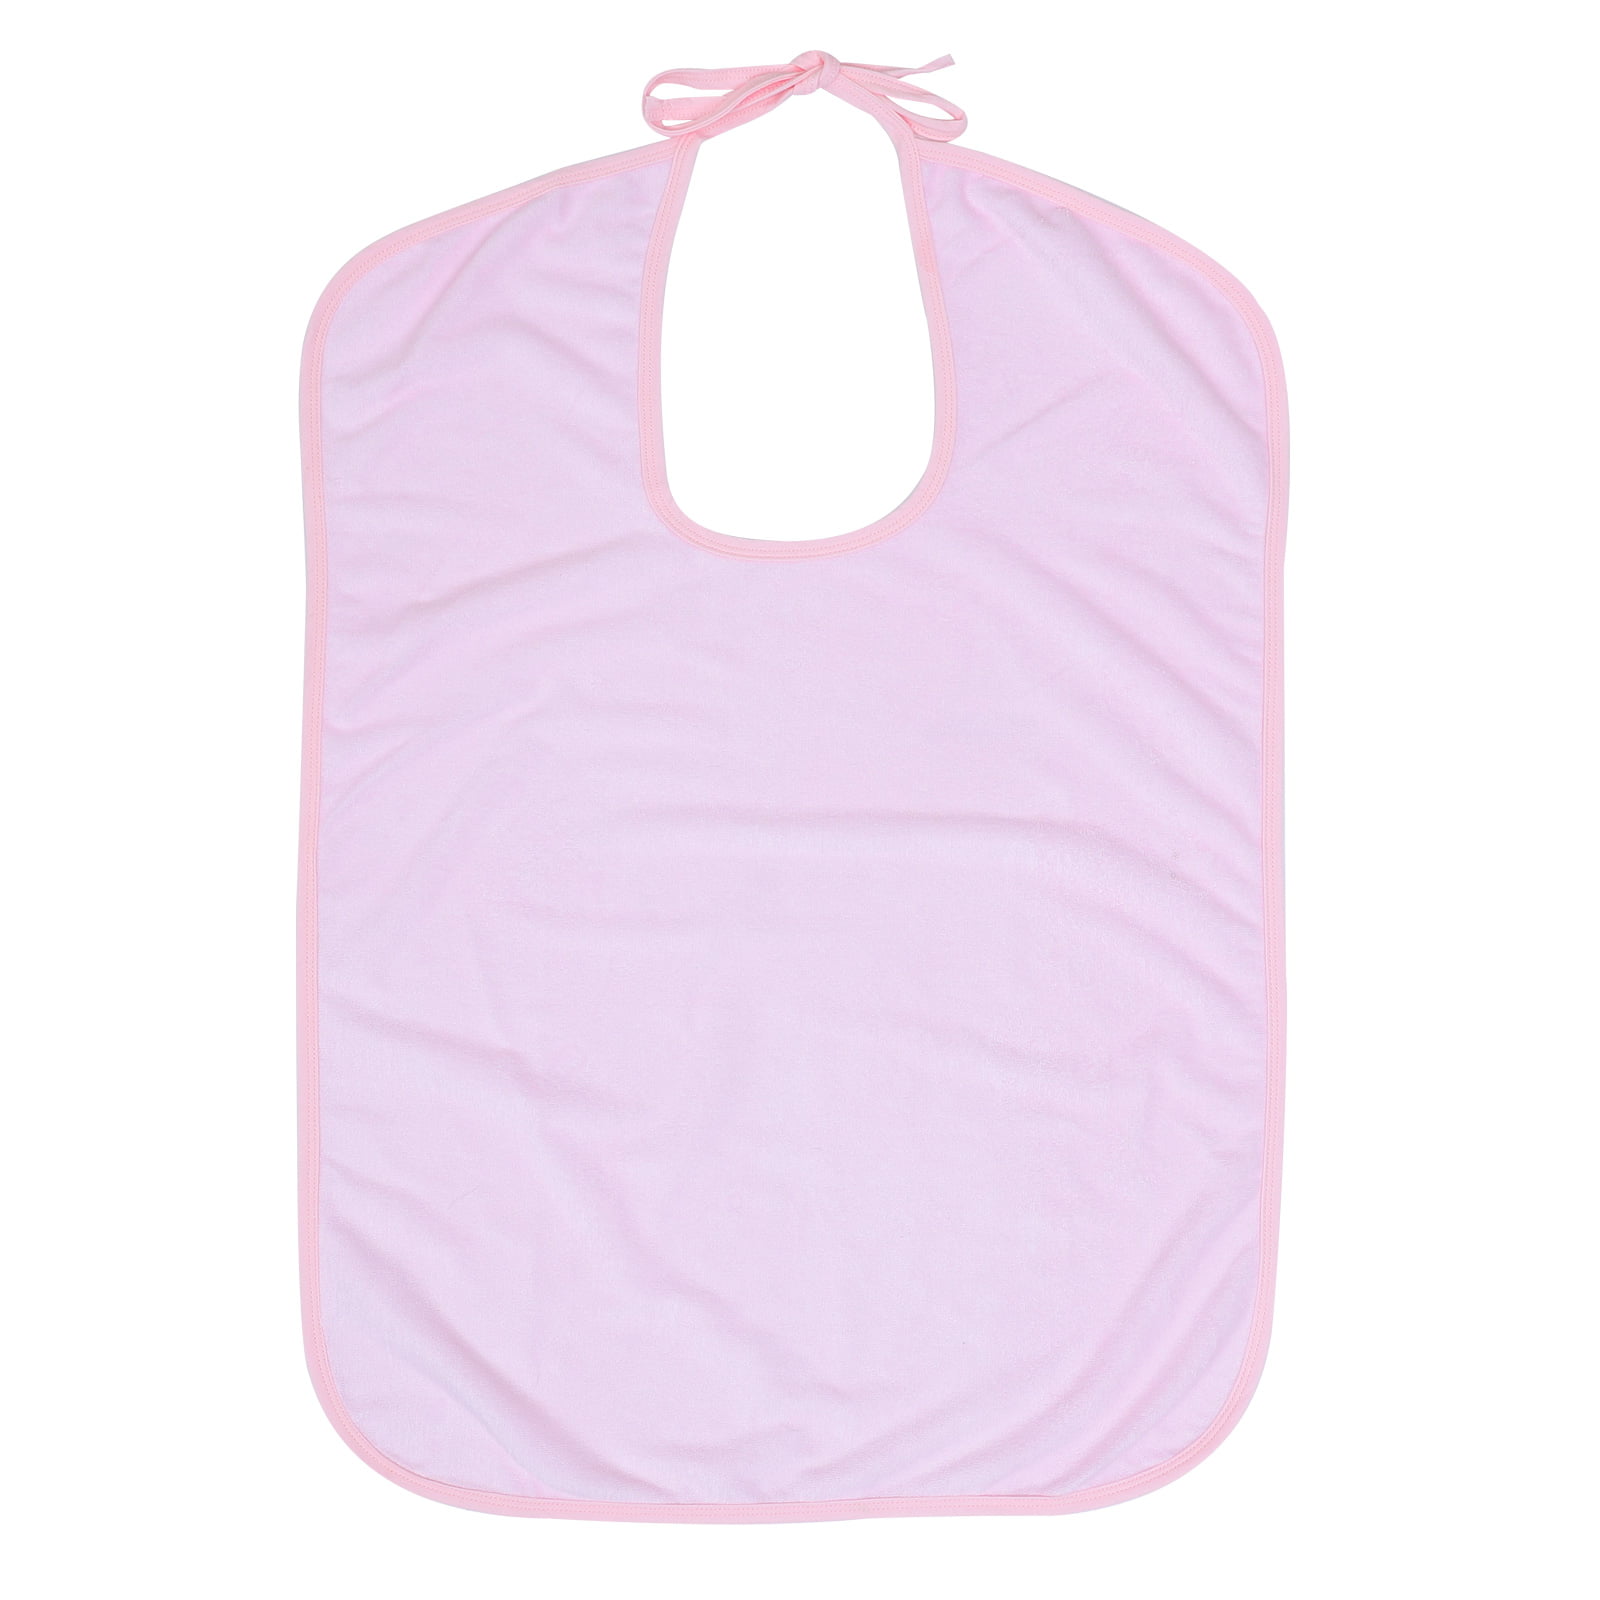 Adult Mealtime Saliva Towel Dining Apron Clothes Bamboo Protector S-Light Pink Elderly Waterproof Bib 2 Color 3 Size Adult Bib 